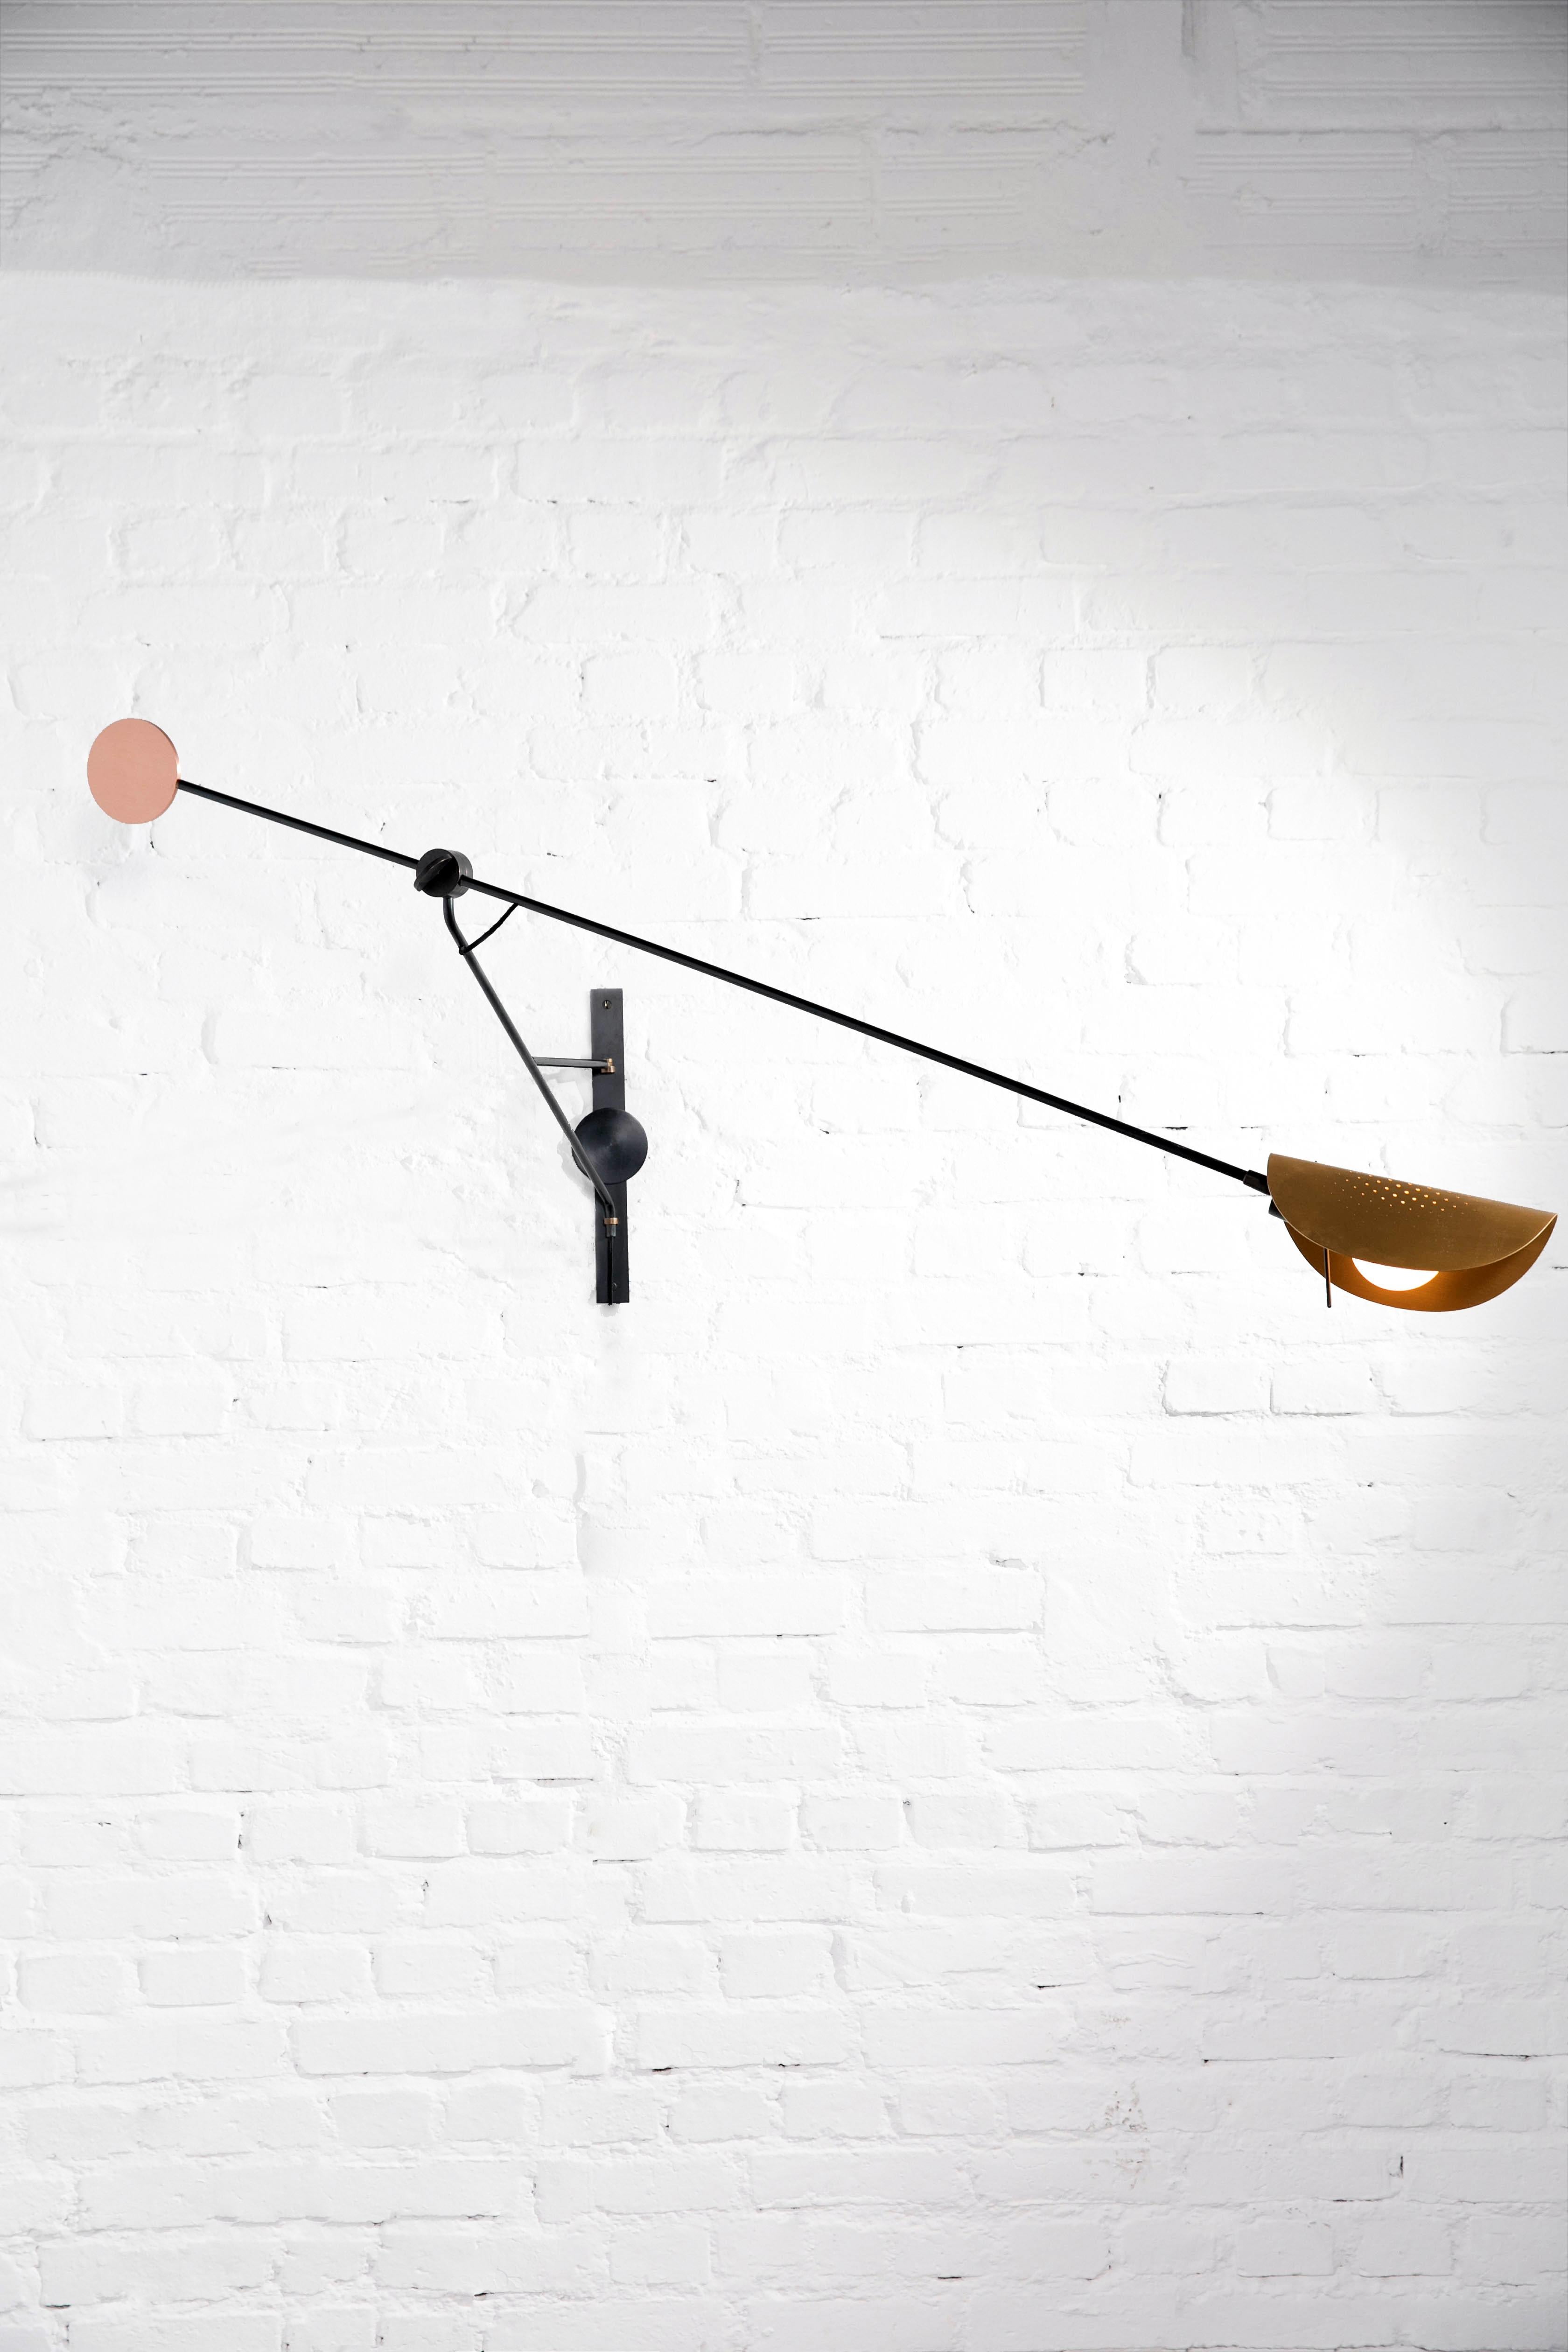 Moon bracket lamp by SB26
Dimensions: W 159 x D 43 x H 19 cm
Materials: Steel, copper, brass gilded with pure gold

Evoking an industrial metal architecture by its silhouette, Moon is balanced in space and refined to its worked ends which gives